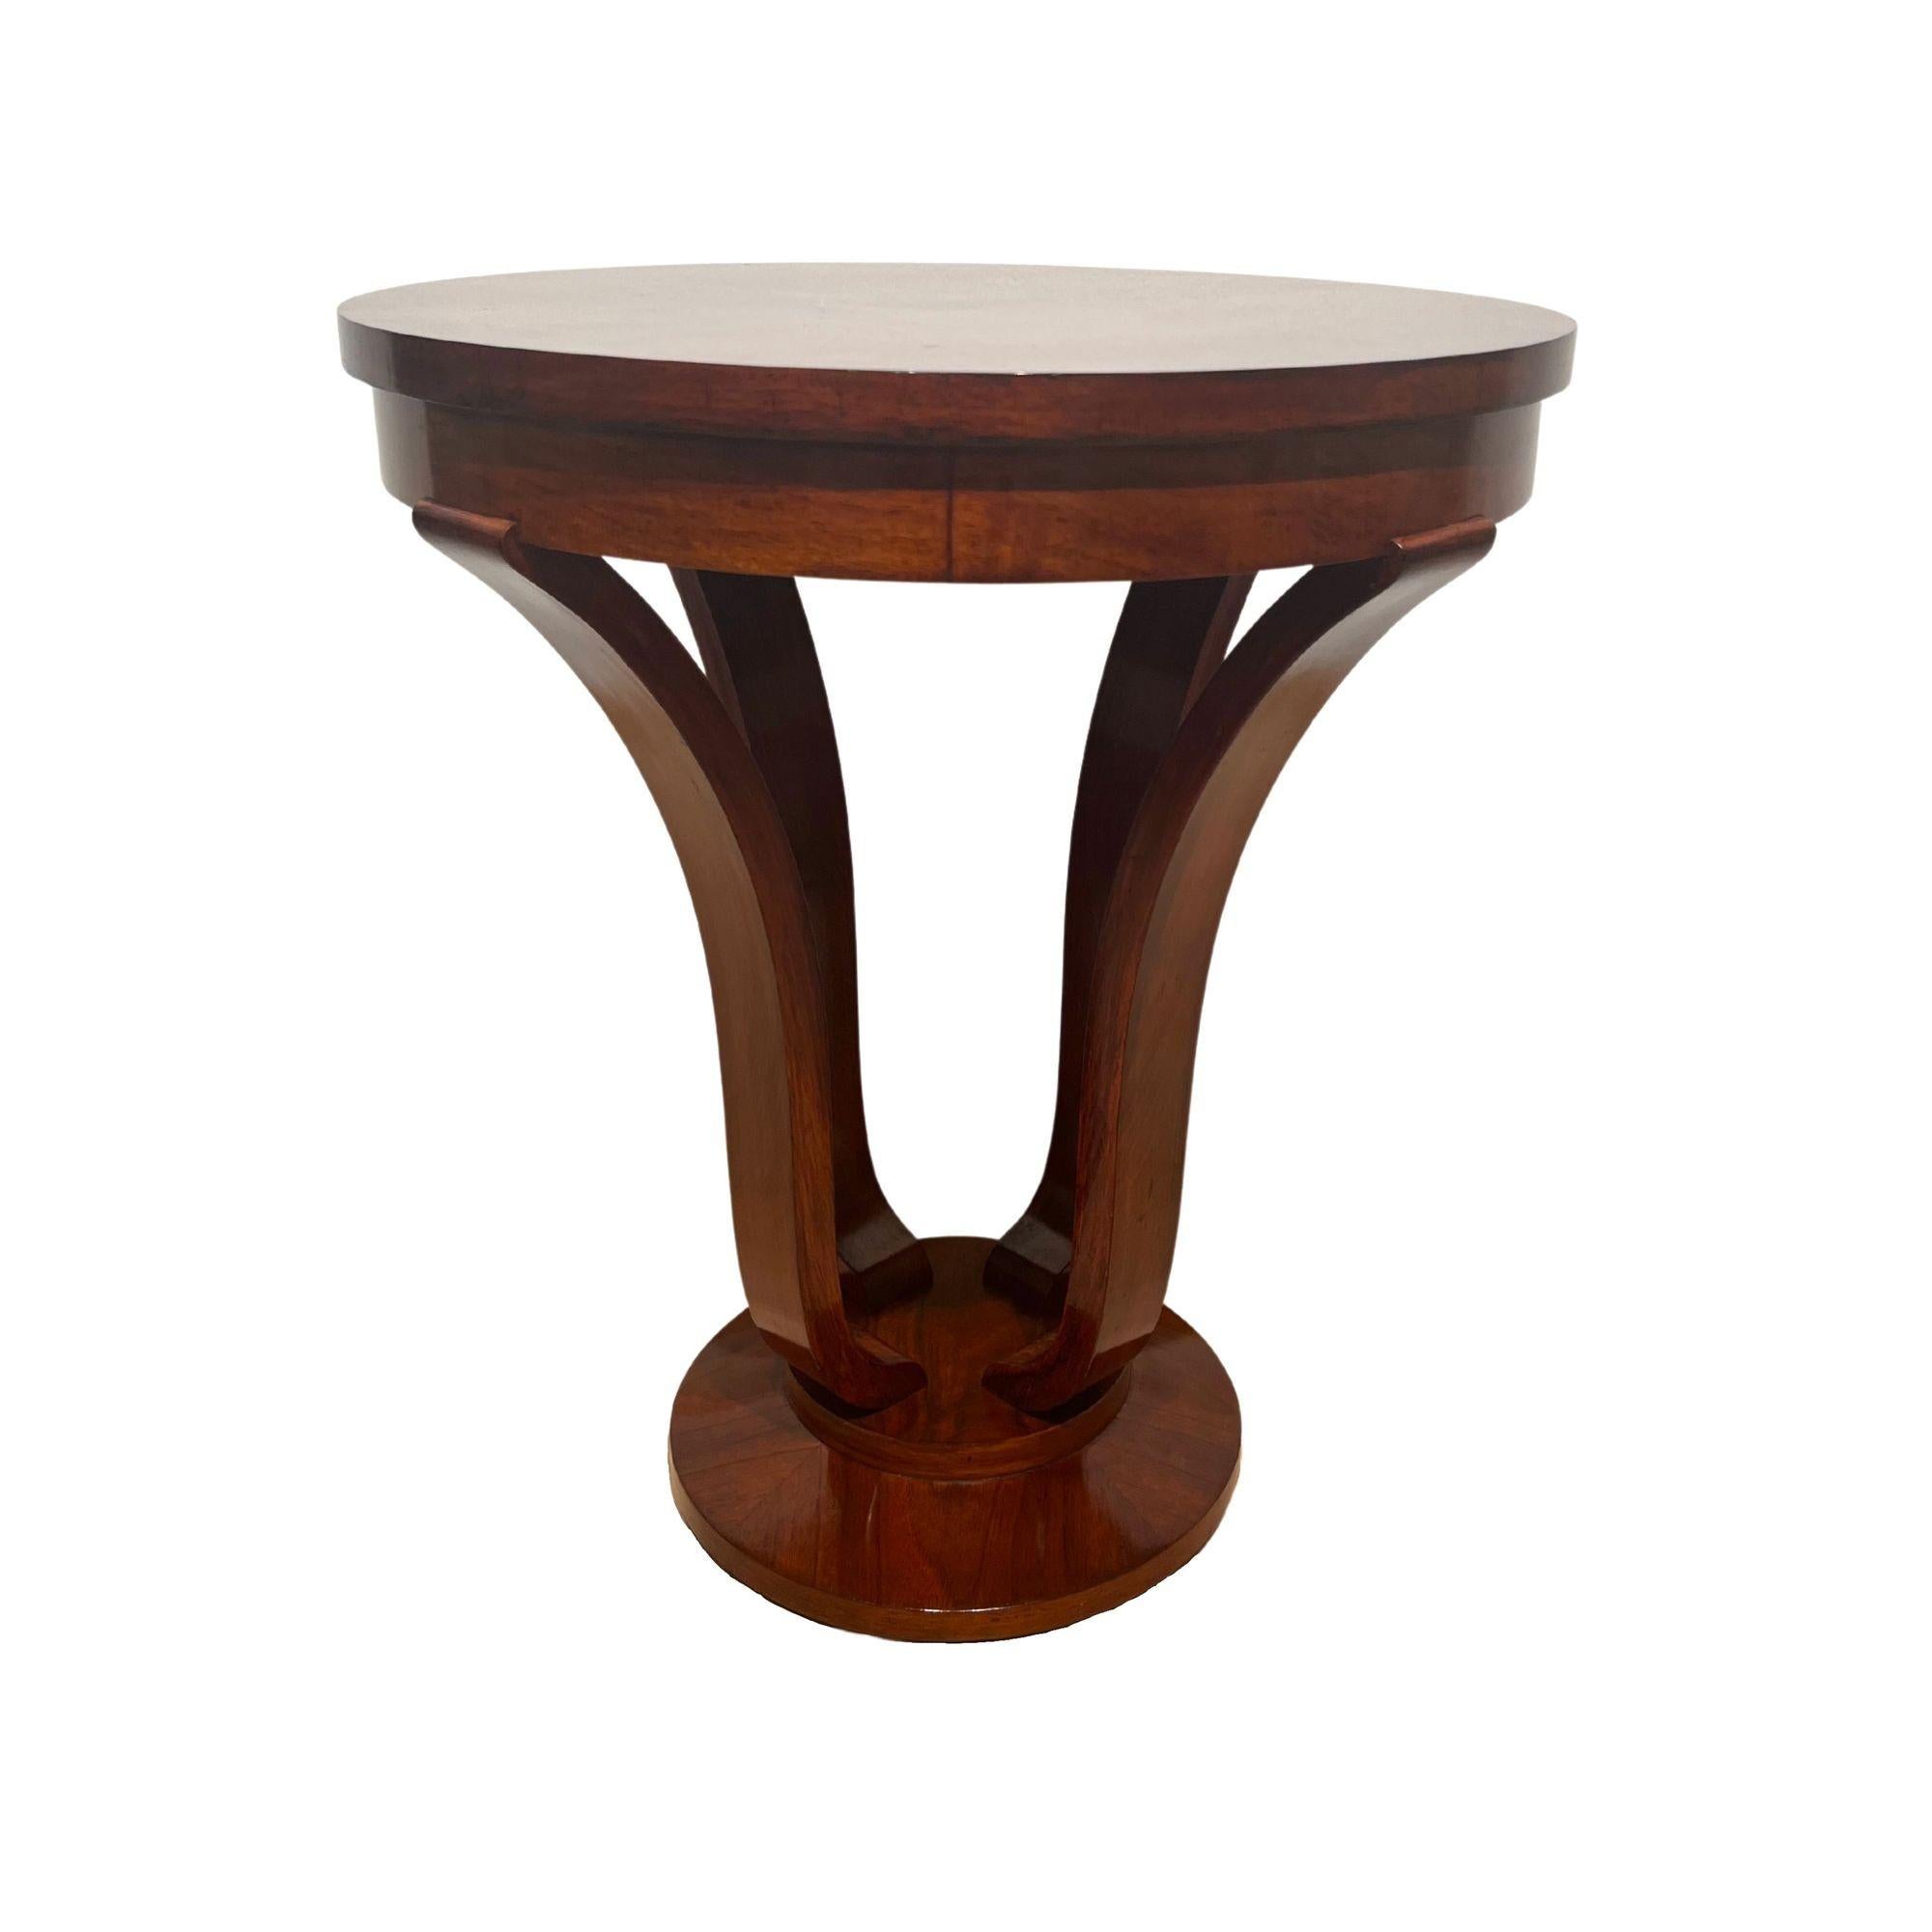 Beautiful, classic four-legged original french art deco gueridon or round side table.
Walnut veneered and solid wood. 4 legs in beech solid wood. Lightly stained reddish wood tone.
Dimensions: H 59,5 cm x Ø 51 cm.